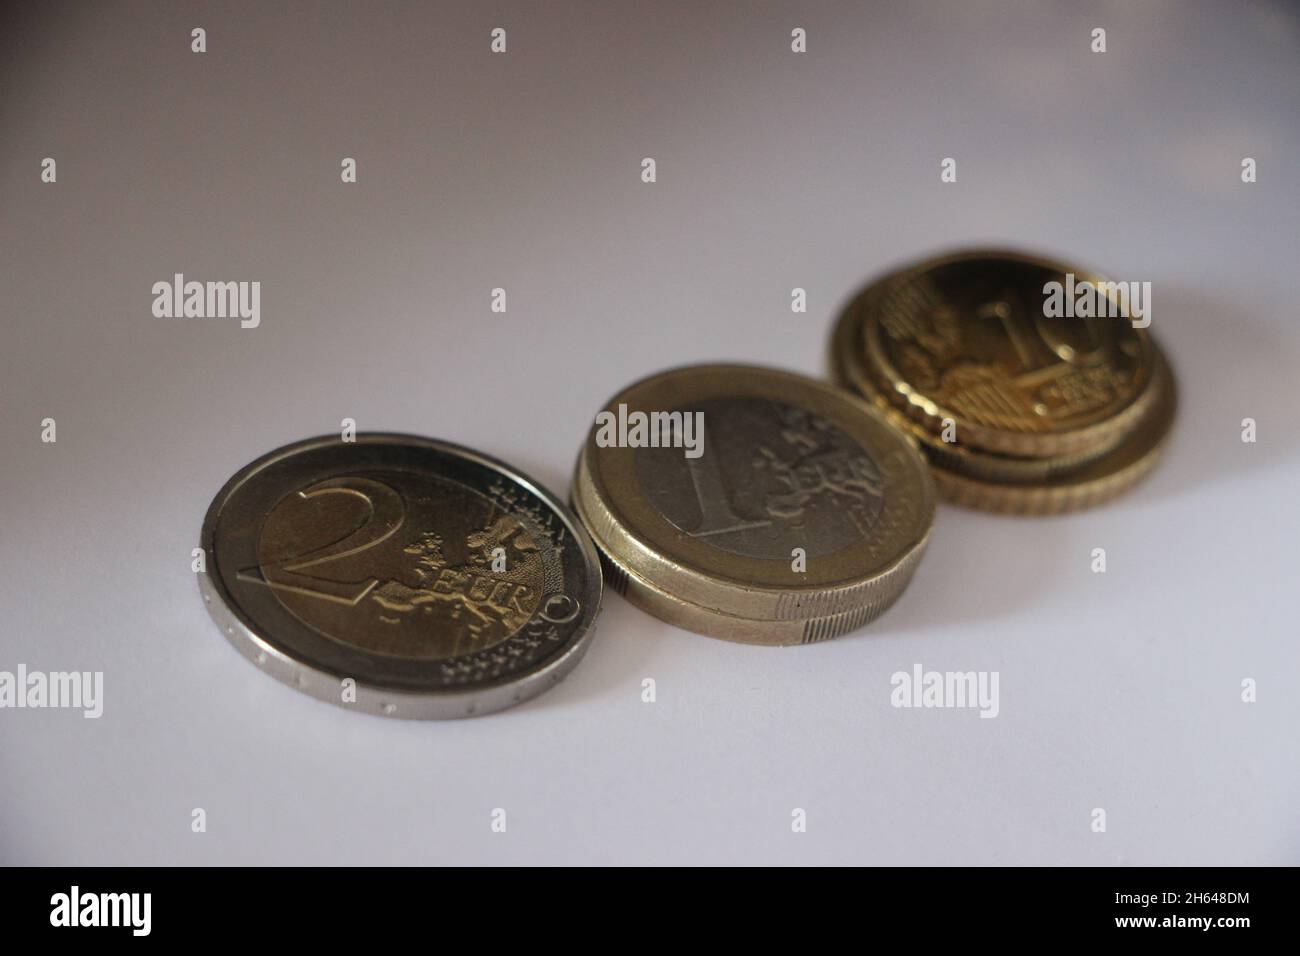 Euro coins on the table. Money and finance concept. Stock Photo